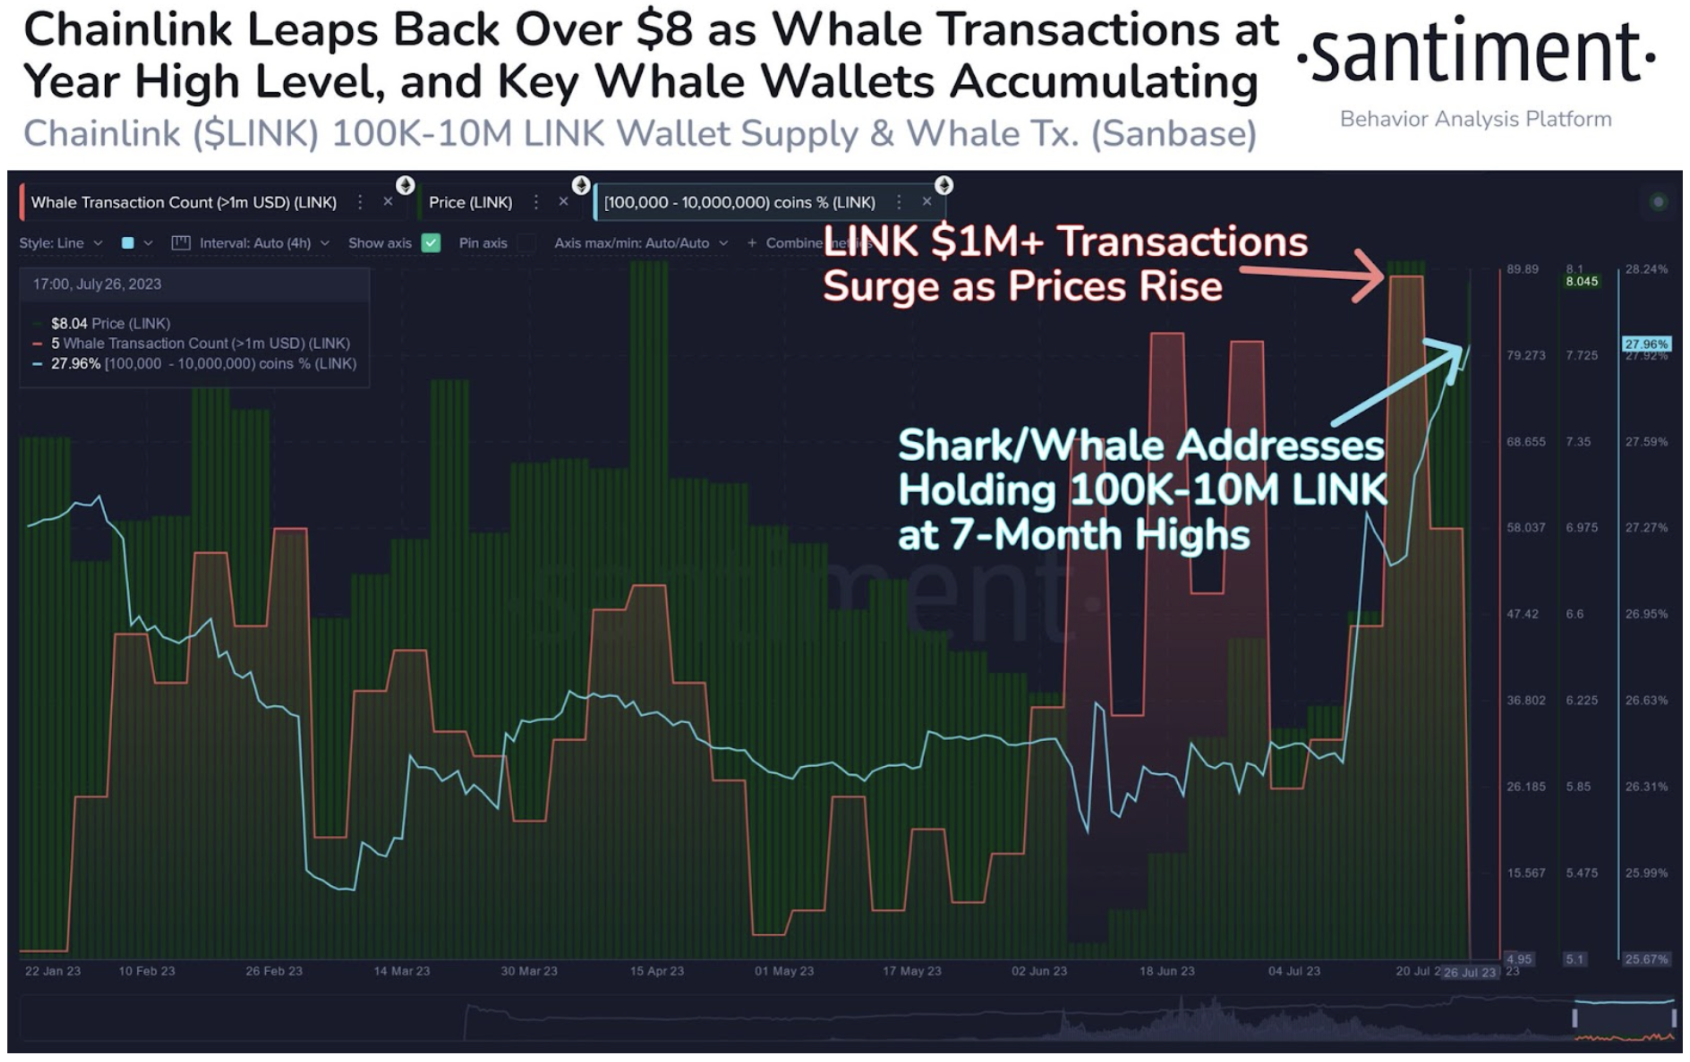 Chainlink whale transactions and accumulation